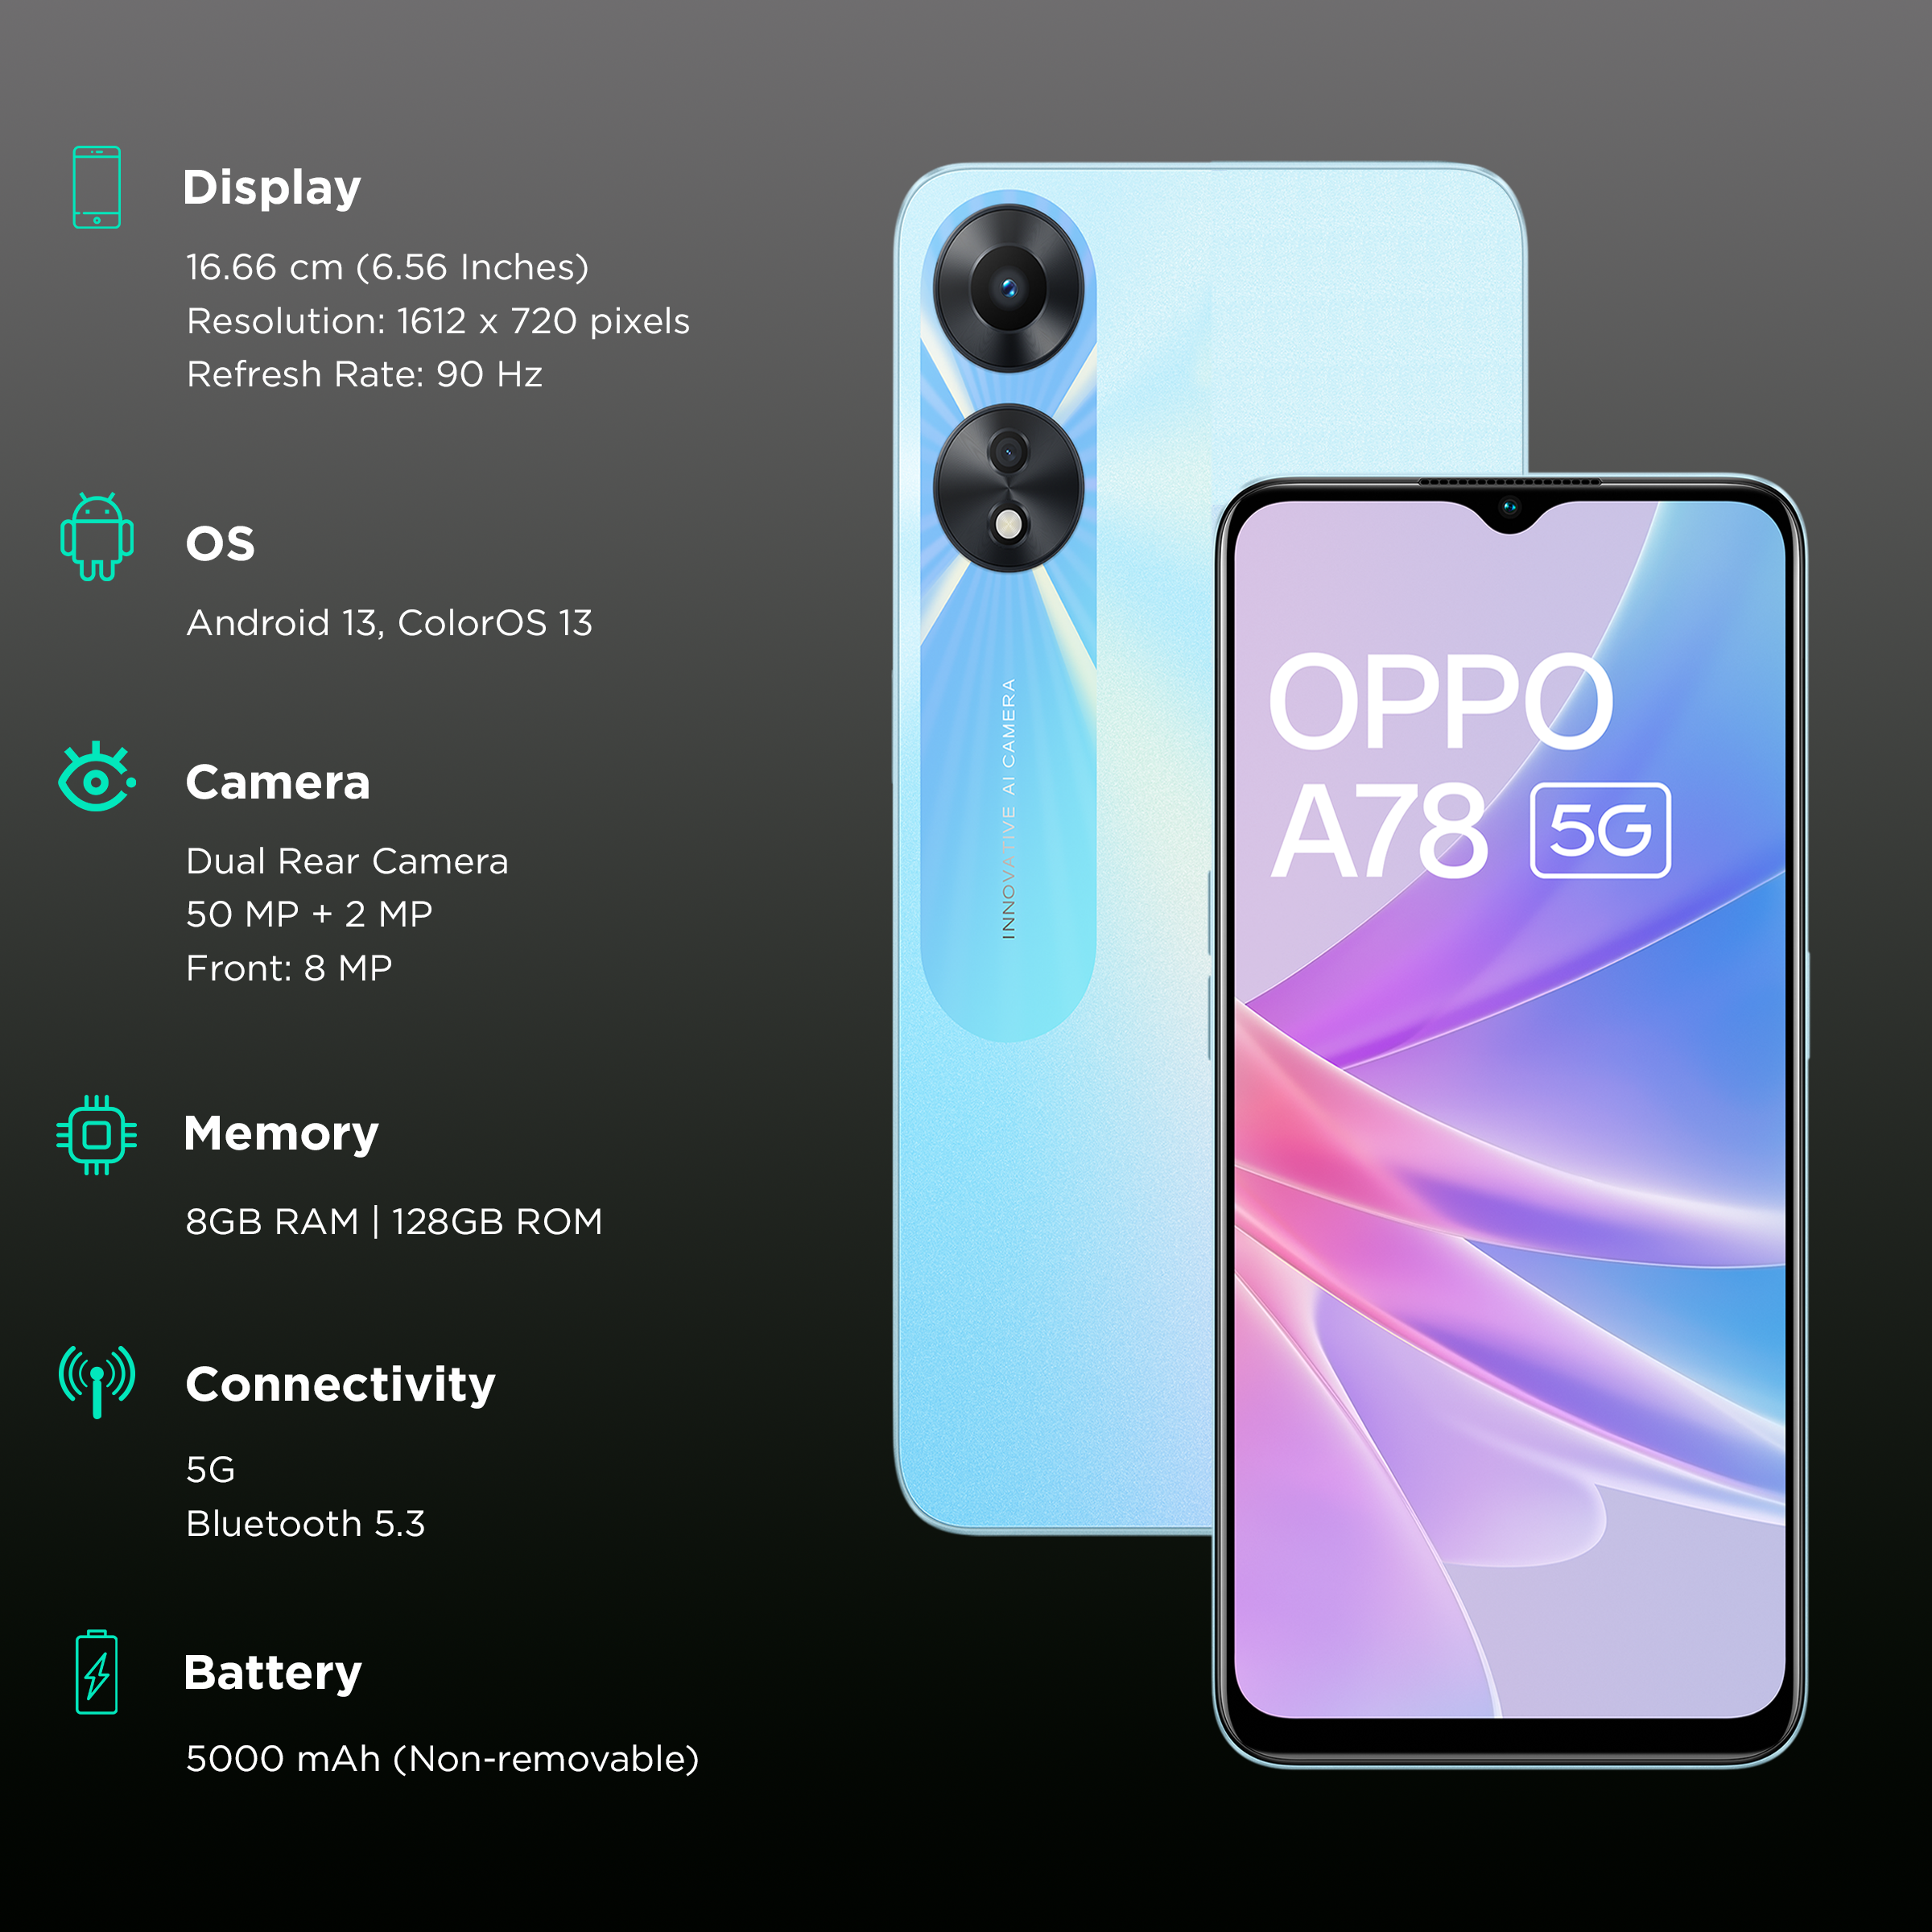 Buy Oppo A78 5G 128 GB, 8 GB RAM, Glowing Blue, Mobile Phone